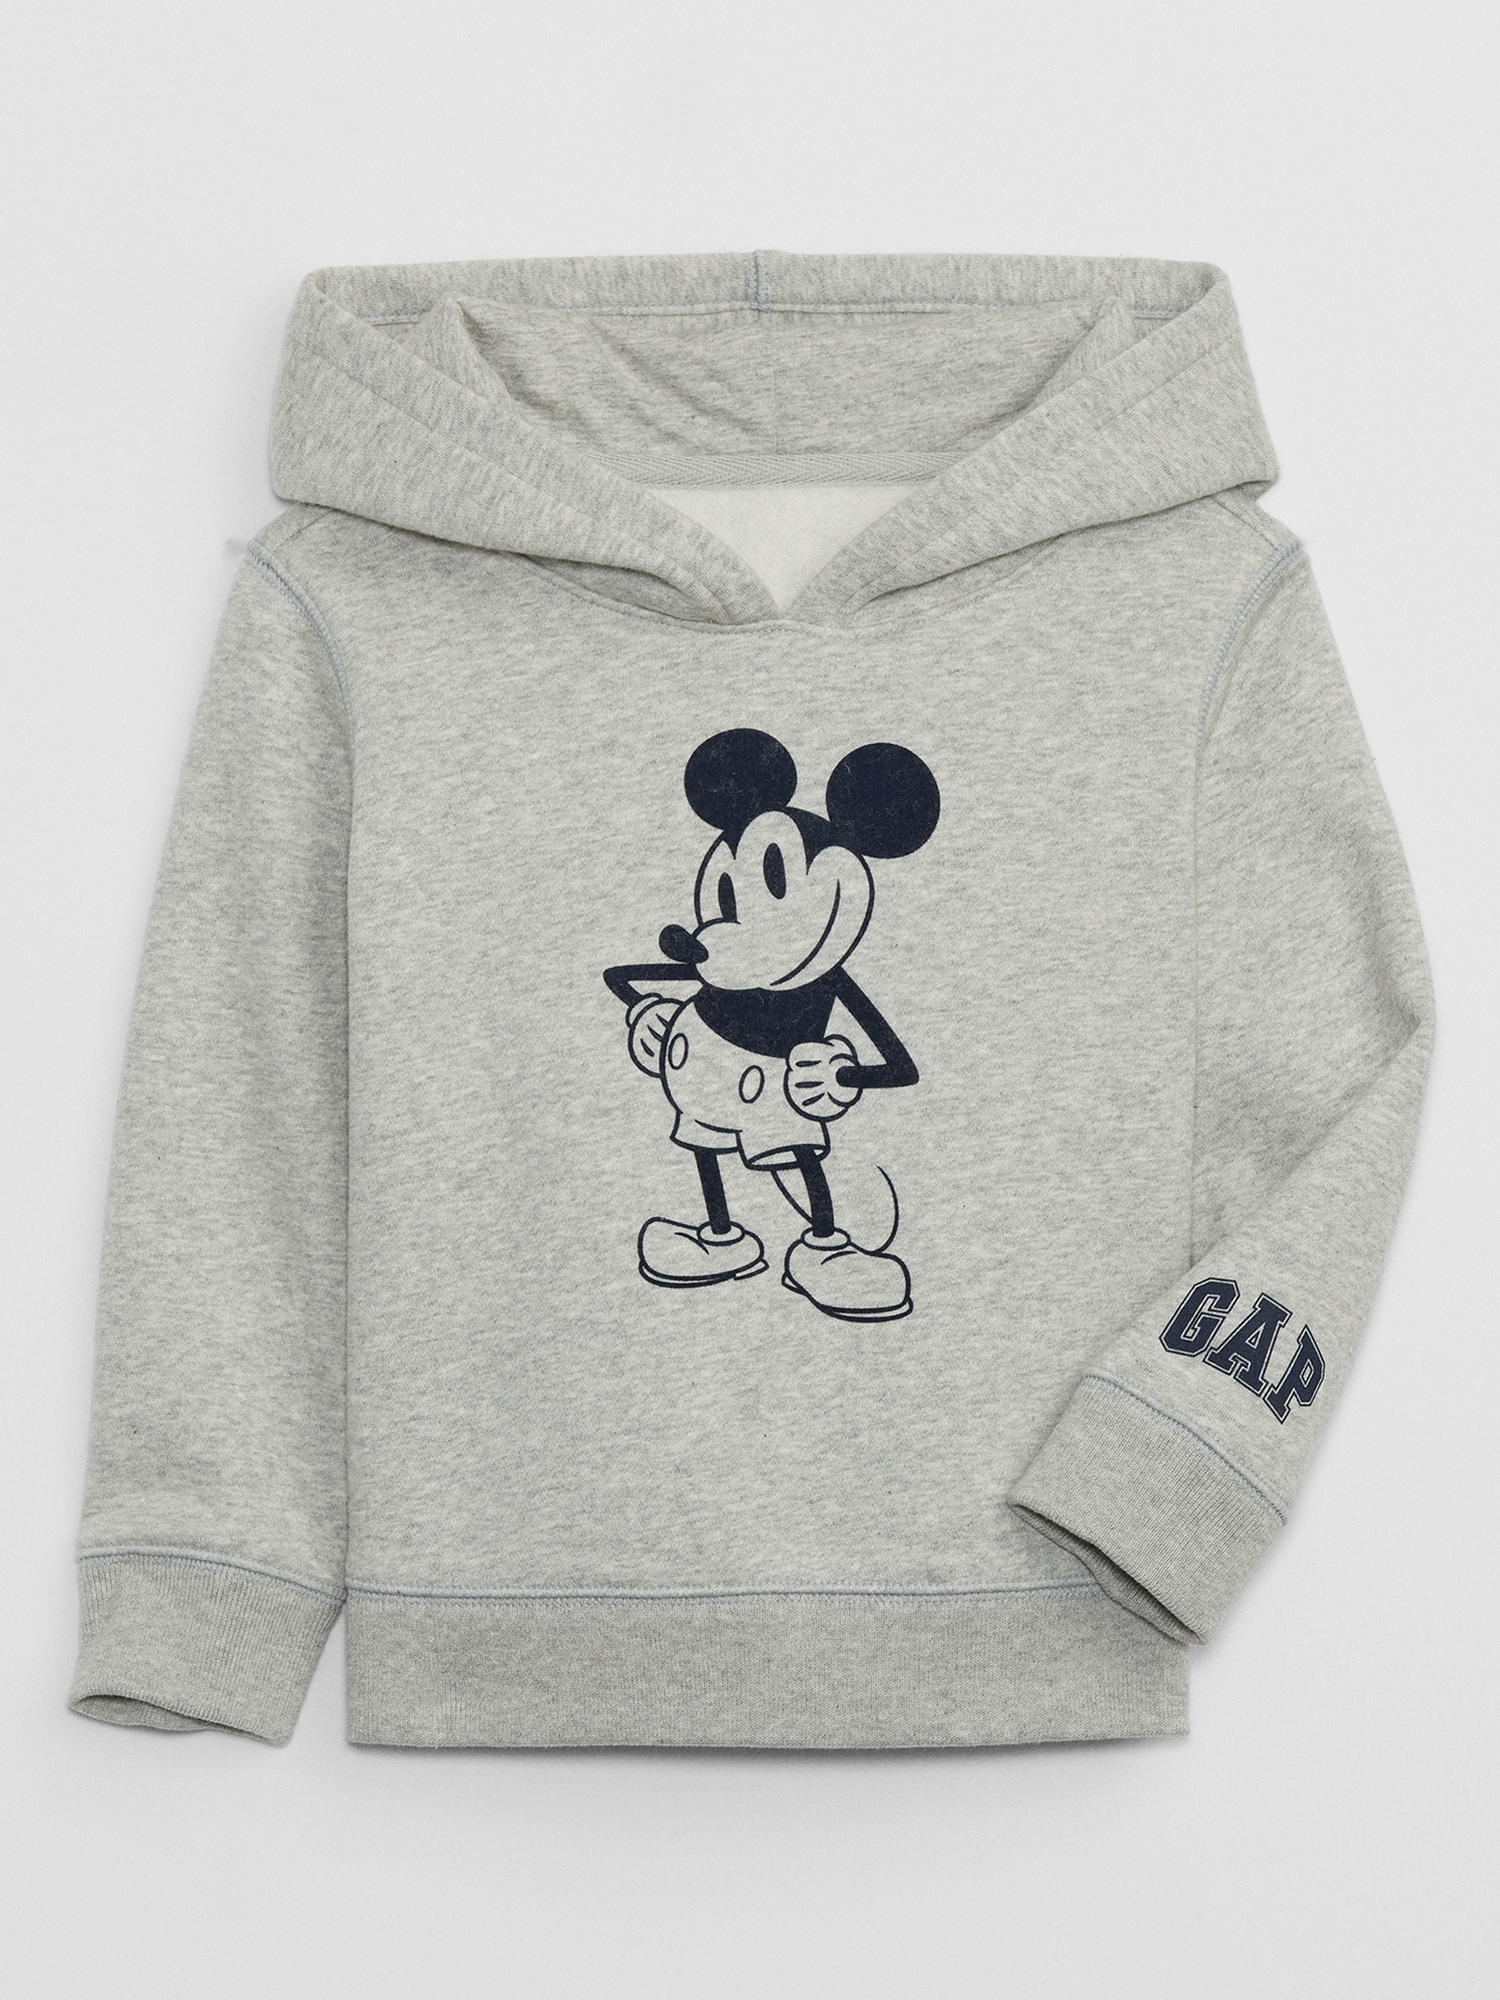 babyGap | Disney Mickey Mouse Graphic Hoodie | Gap Factory